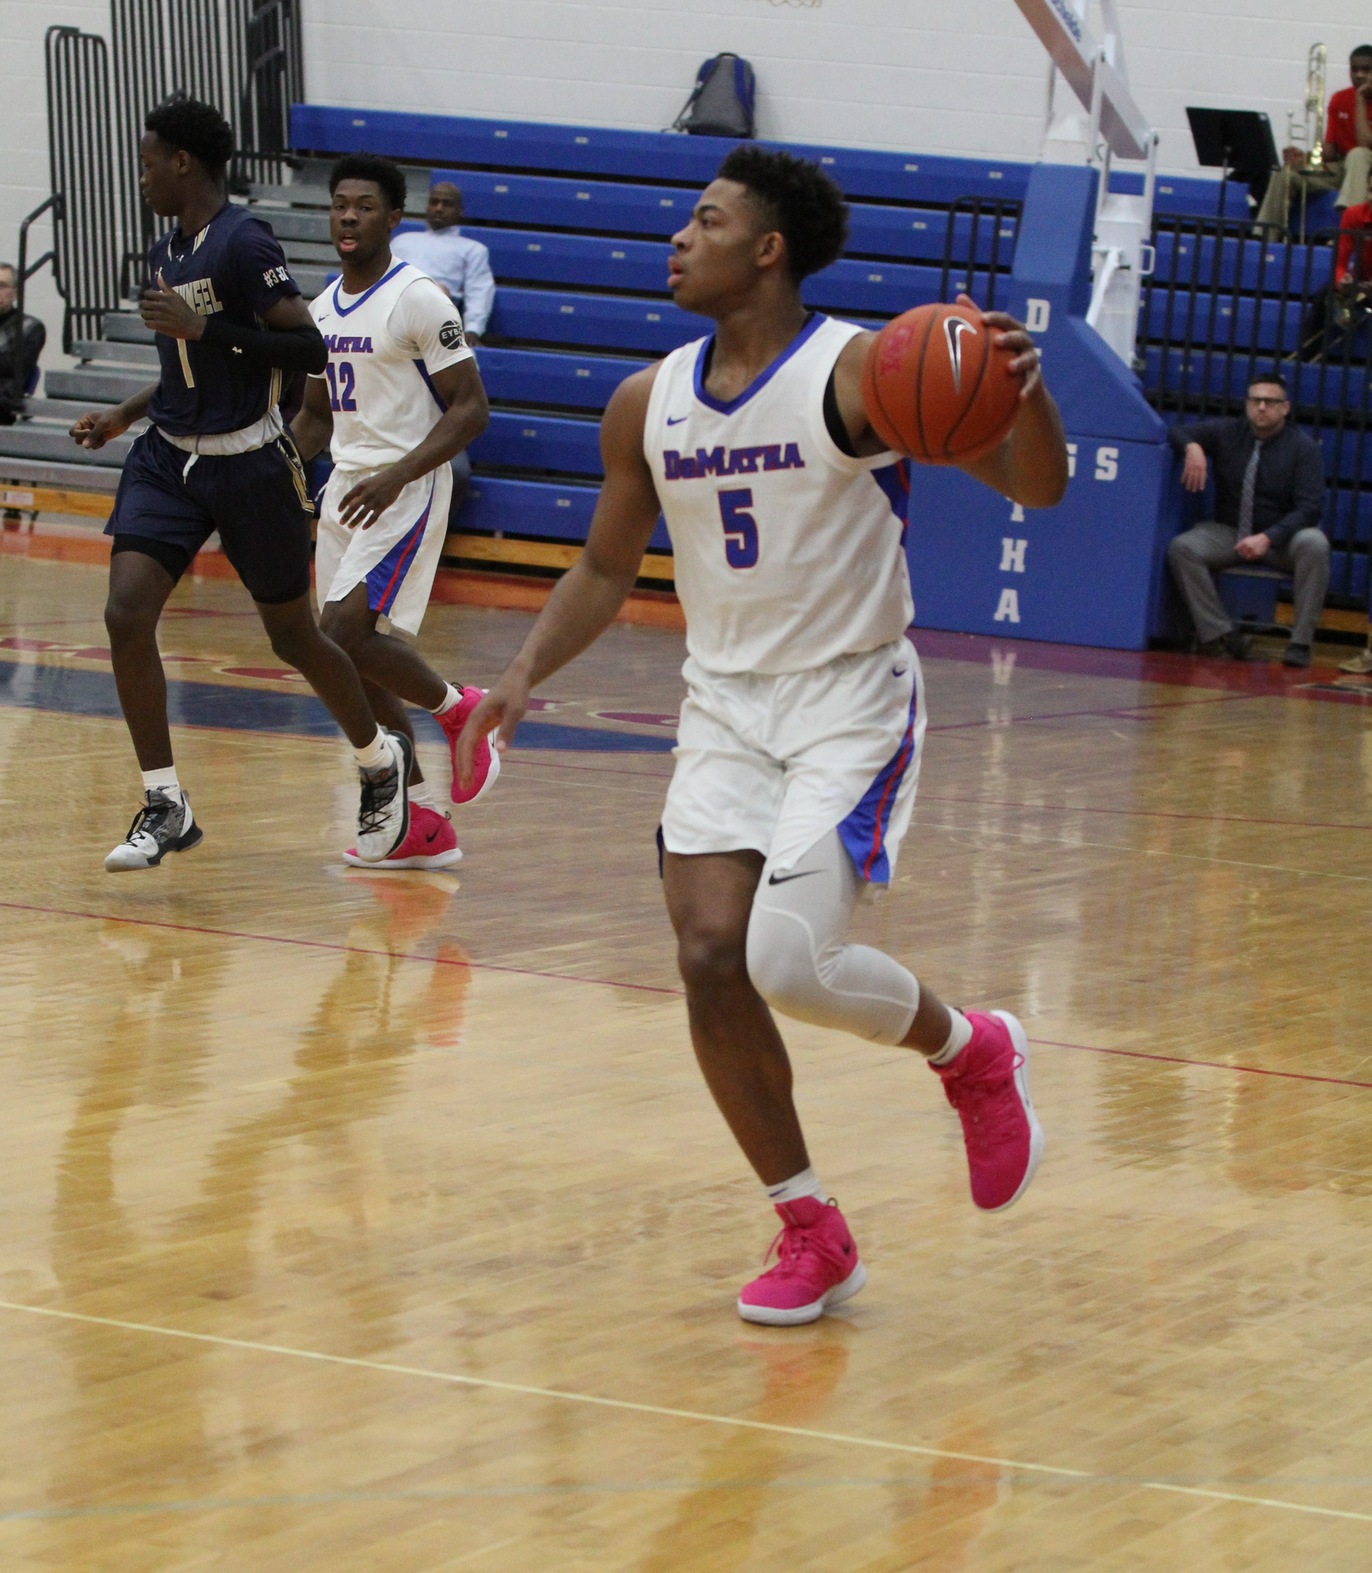 With the win in the Alhambra Championship game, DeMatha Senior Justin Moore (#5) set the program's record for varsity wins with 123.